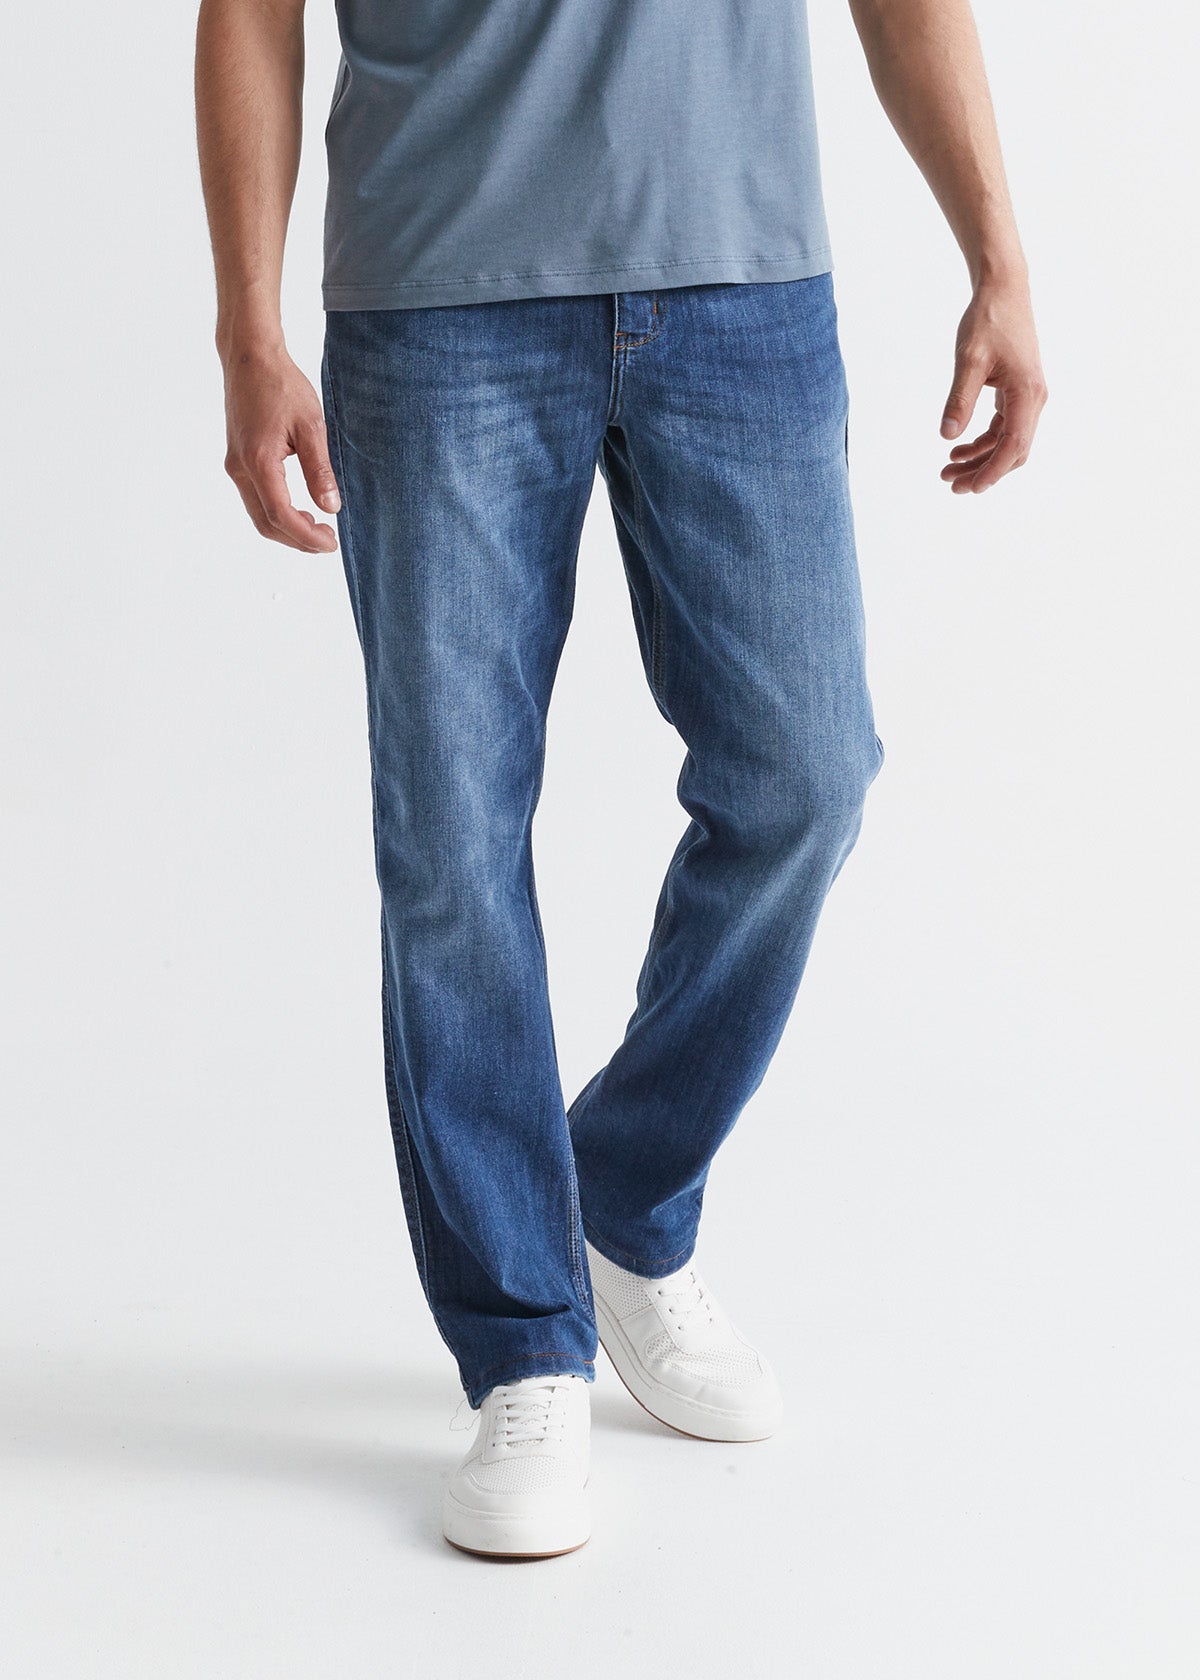 Men's Athletic Fit Straight Fit Jeans